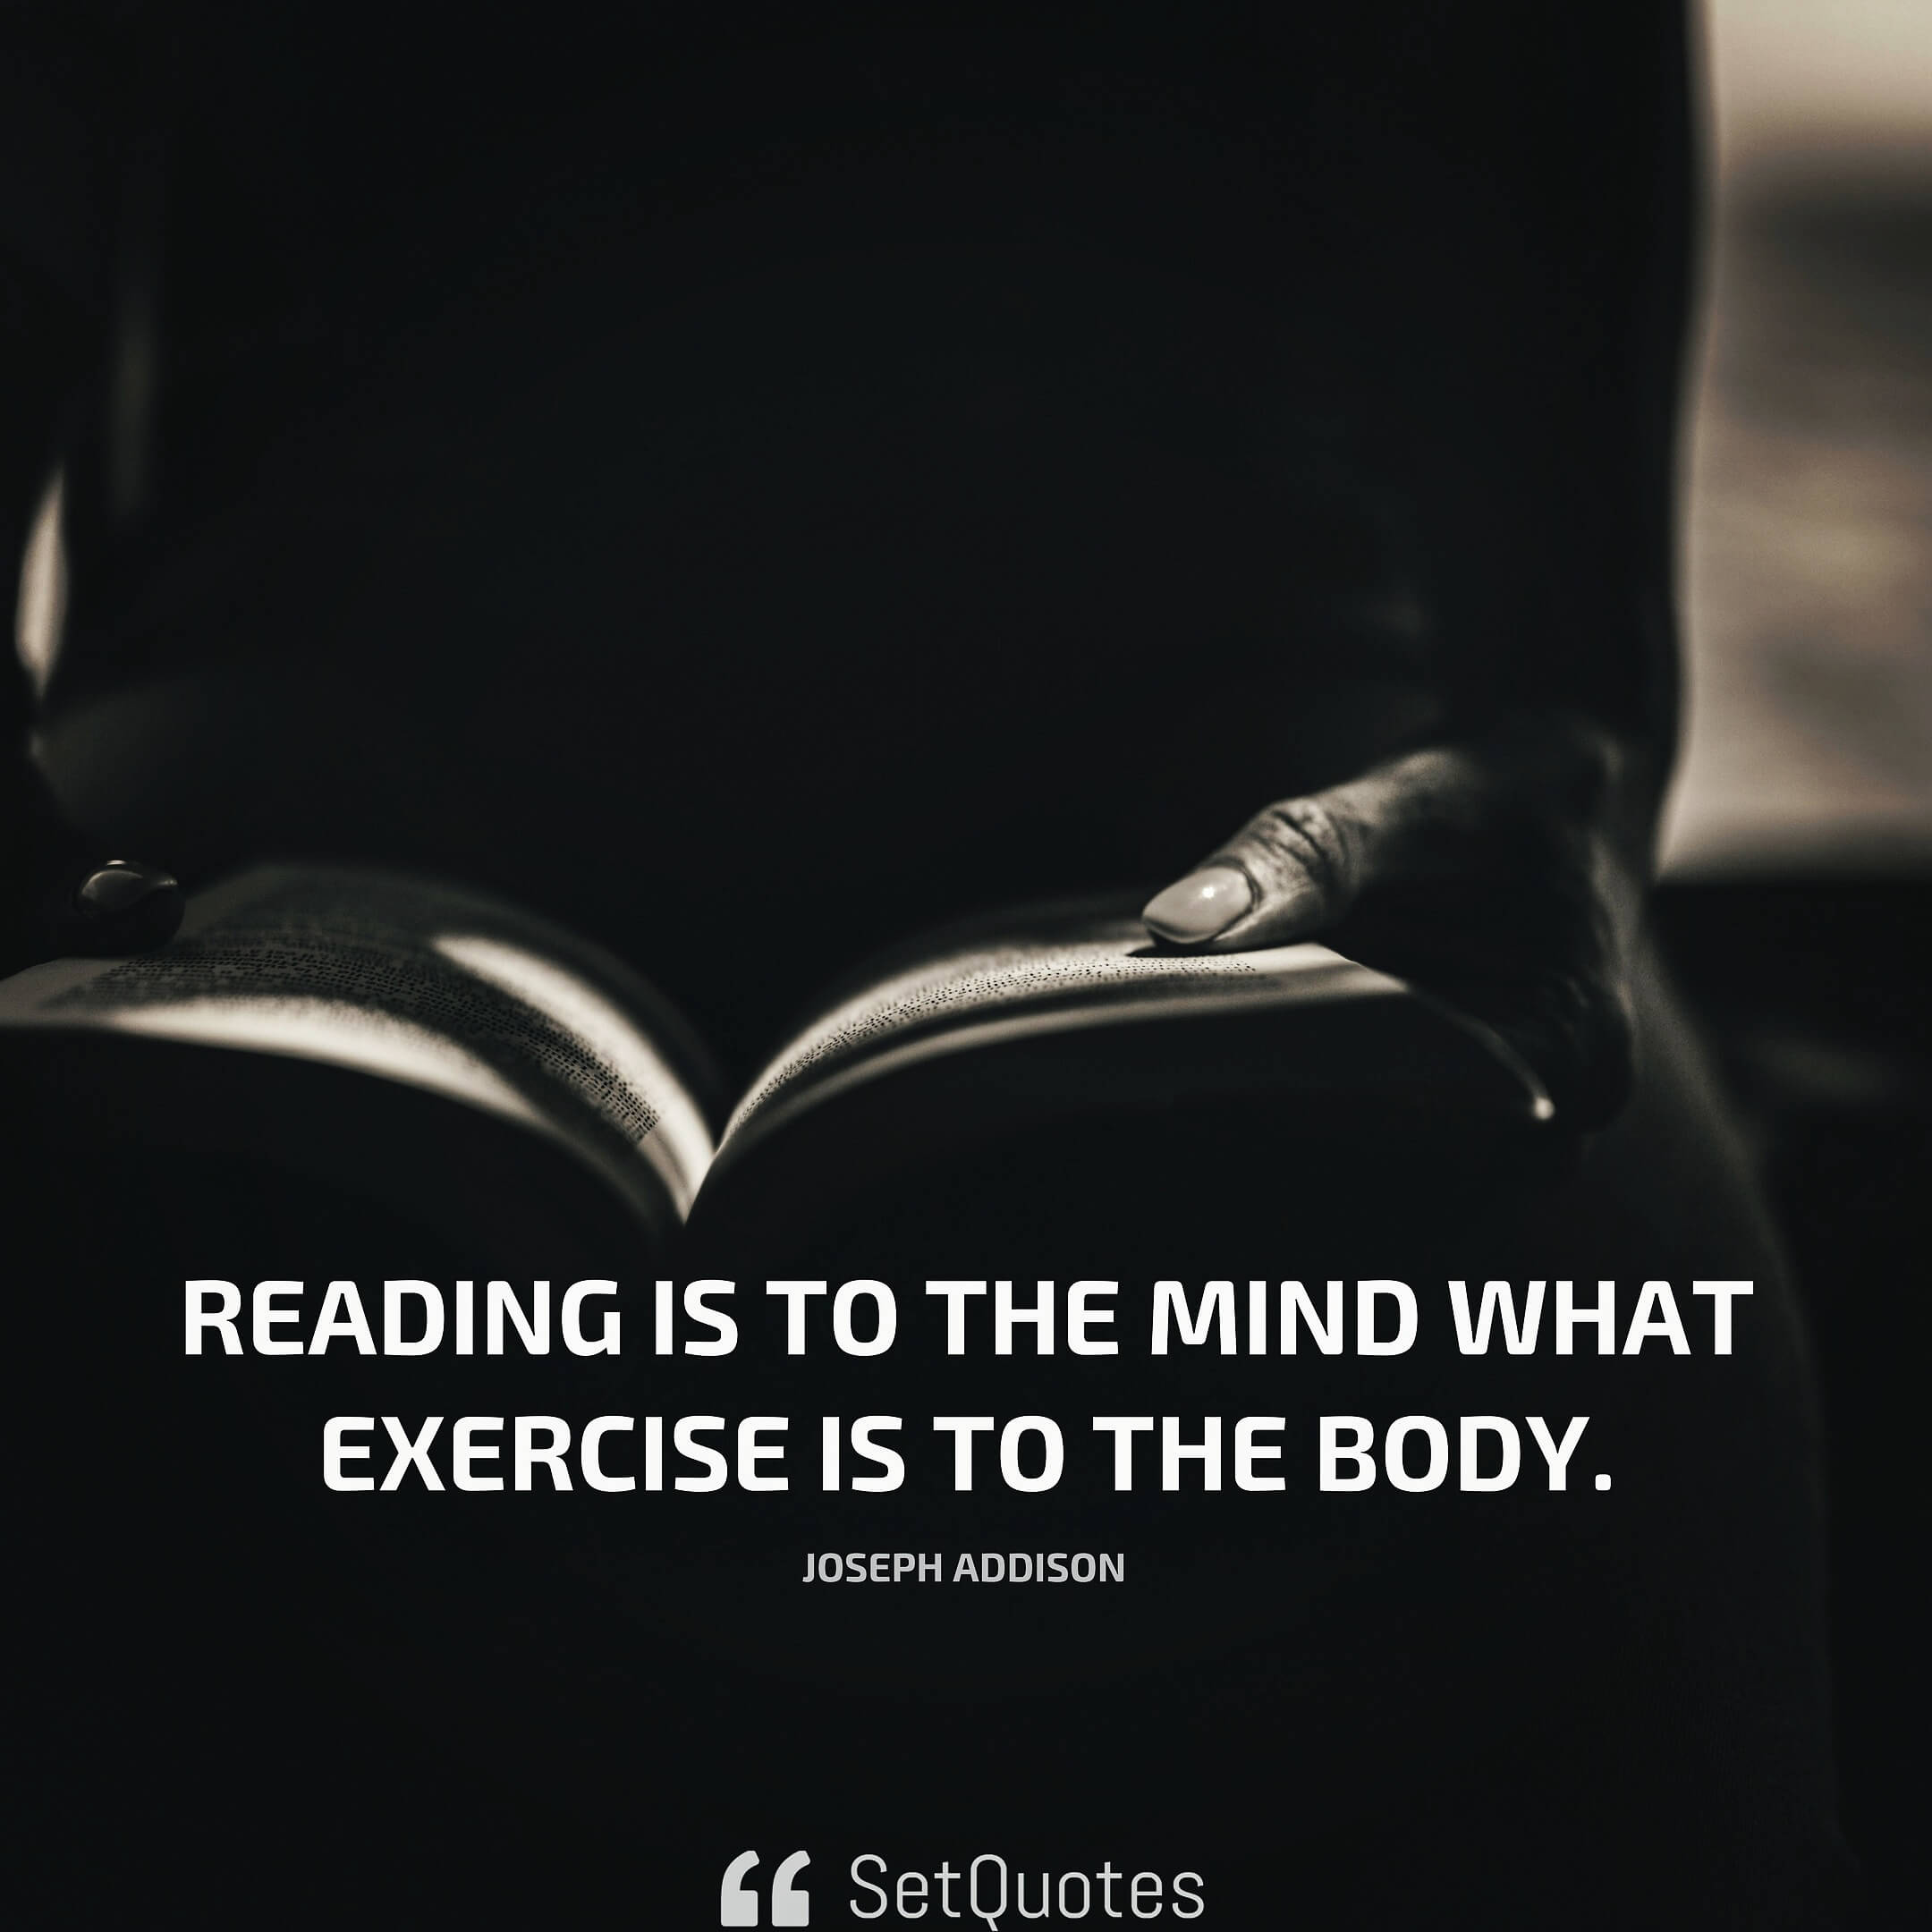 Reading is to the mind what exercise is to the body. - Joseph Addison